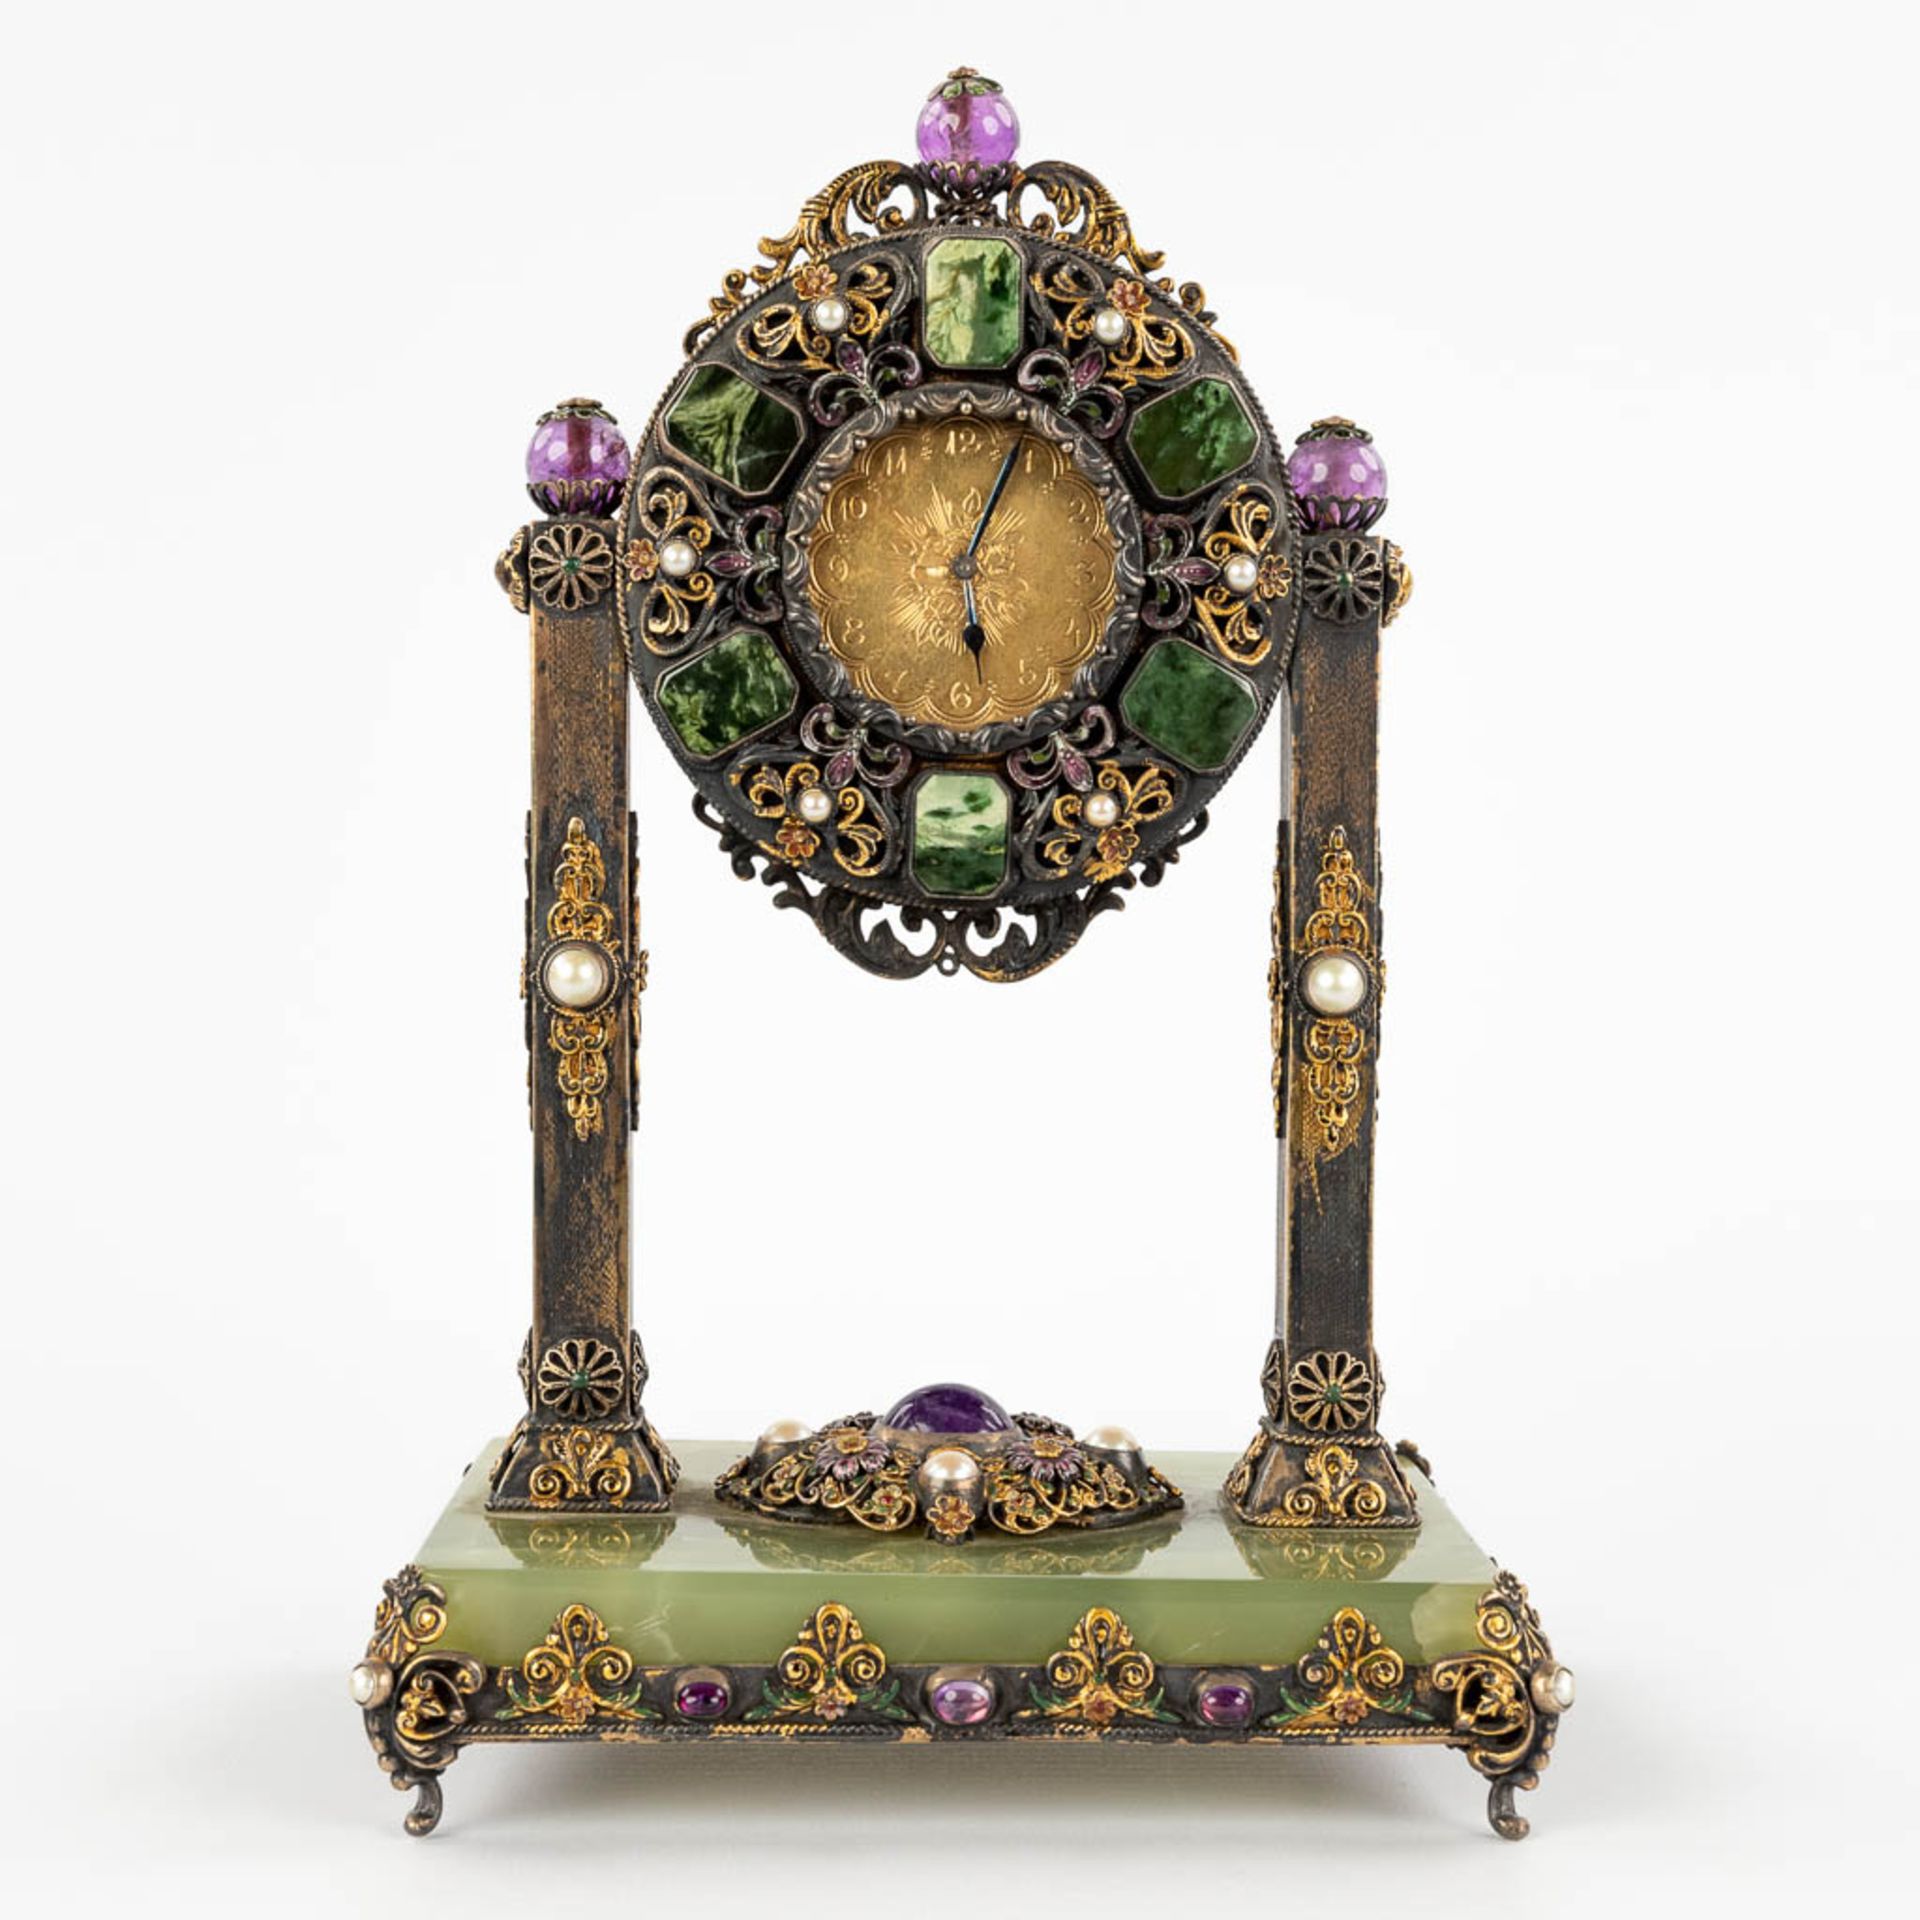 A mantle clock, silver and gold-plated metal and decorated with stone and onyx, pearls. Circa 1900.